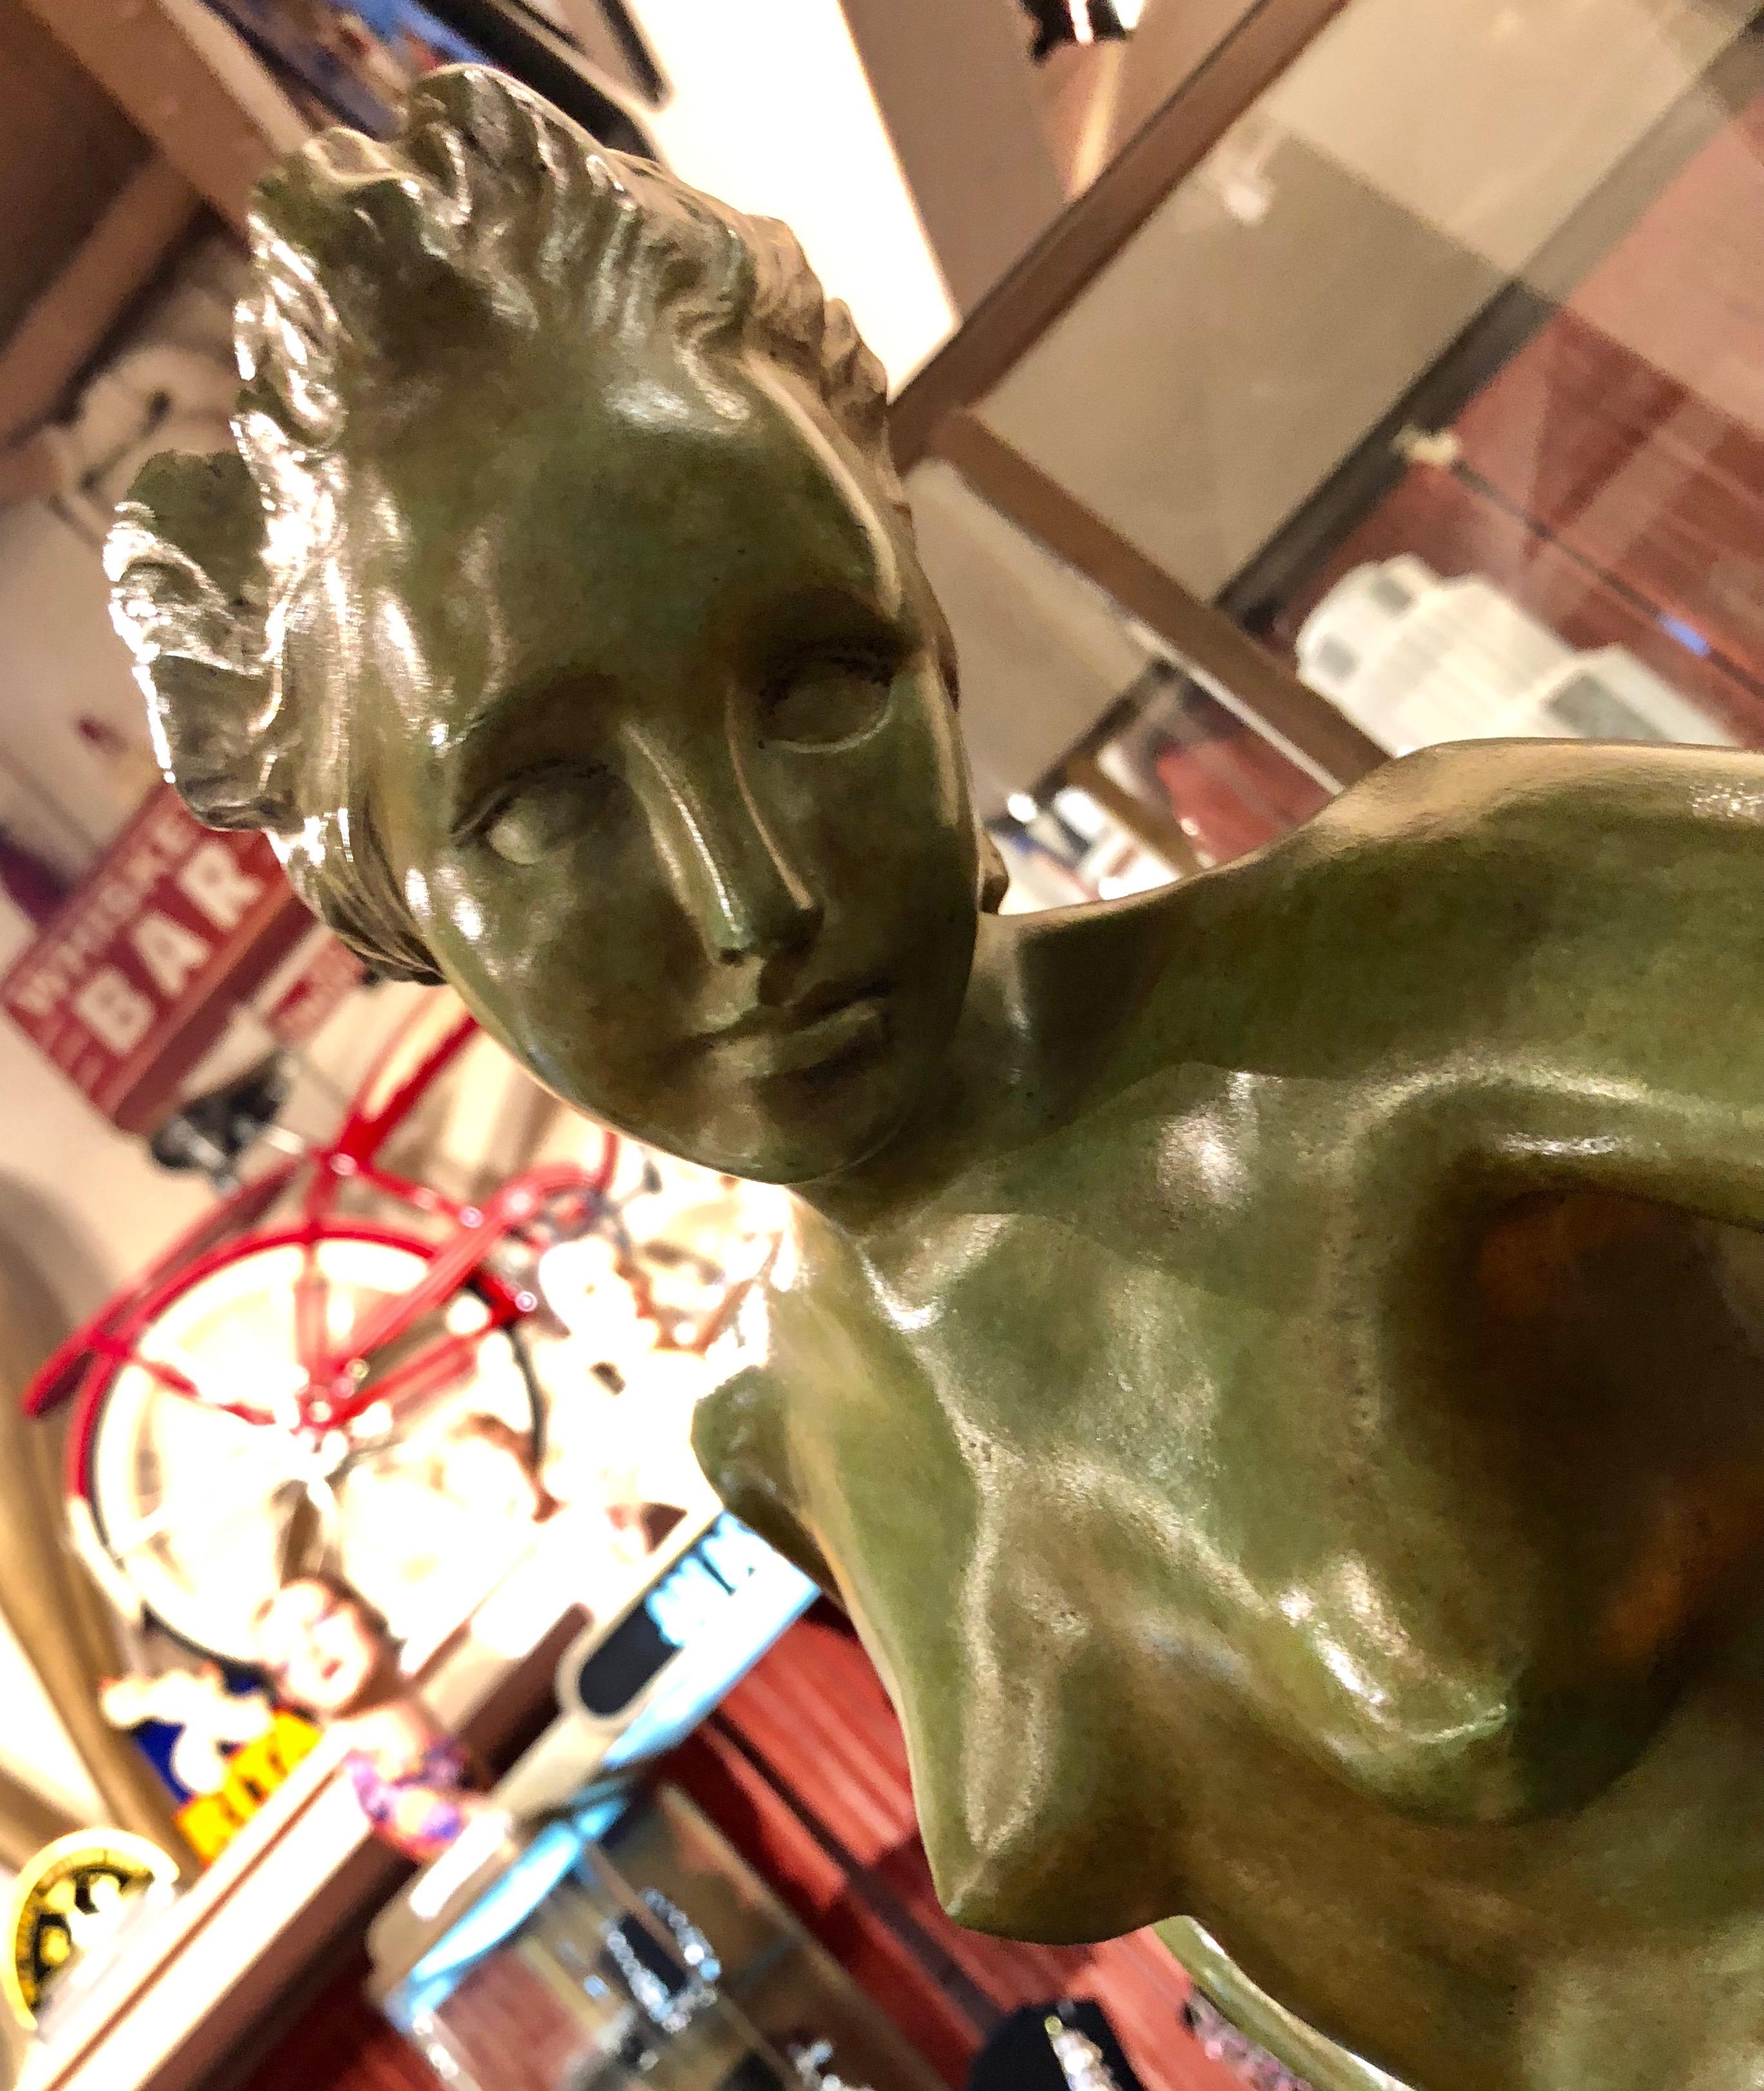 Art Deco bronze female statue by Paule Bisman entitled ”Serenite”. A high quality bronze was produced with only 12 examples ever made, this is number 4/12. Paule Bisman was a Belgian sculptor and painter who lived from 1897-1973. Serenite is a